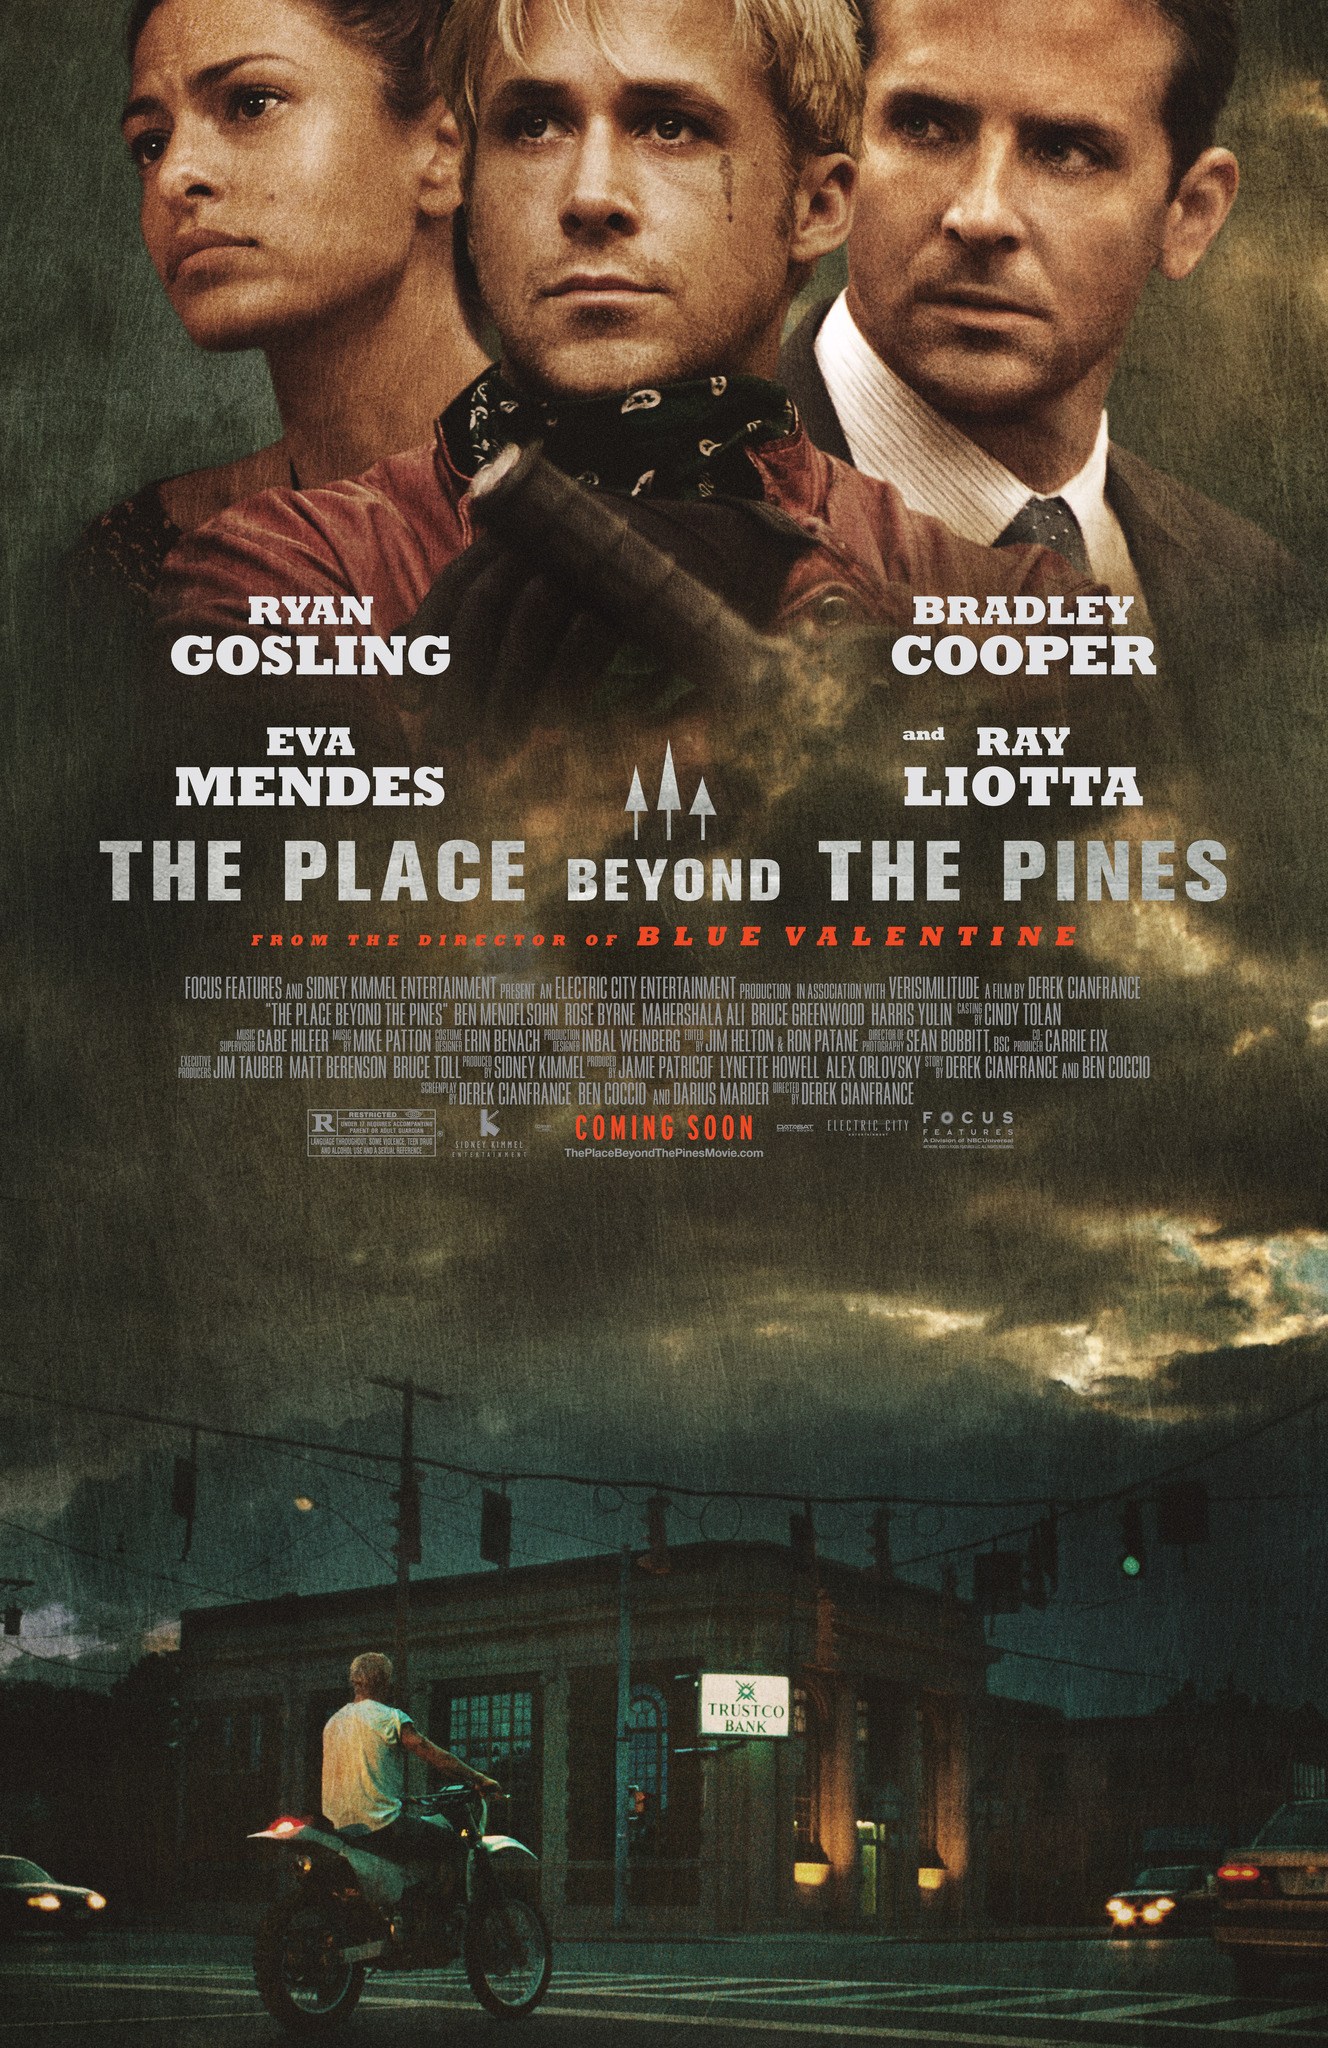 The-Place-Beyond-the-Pines-Poster.jpg?fi